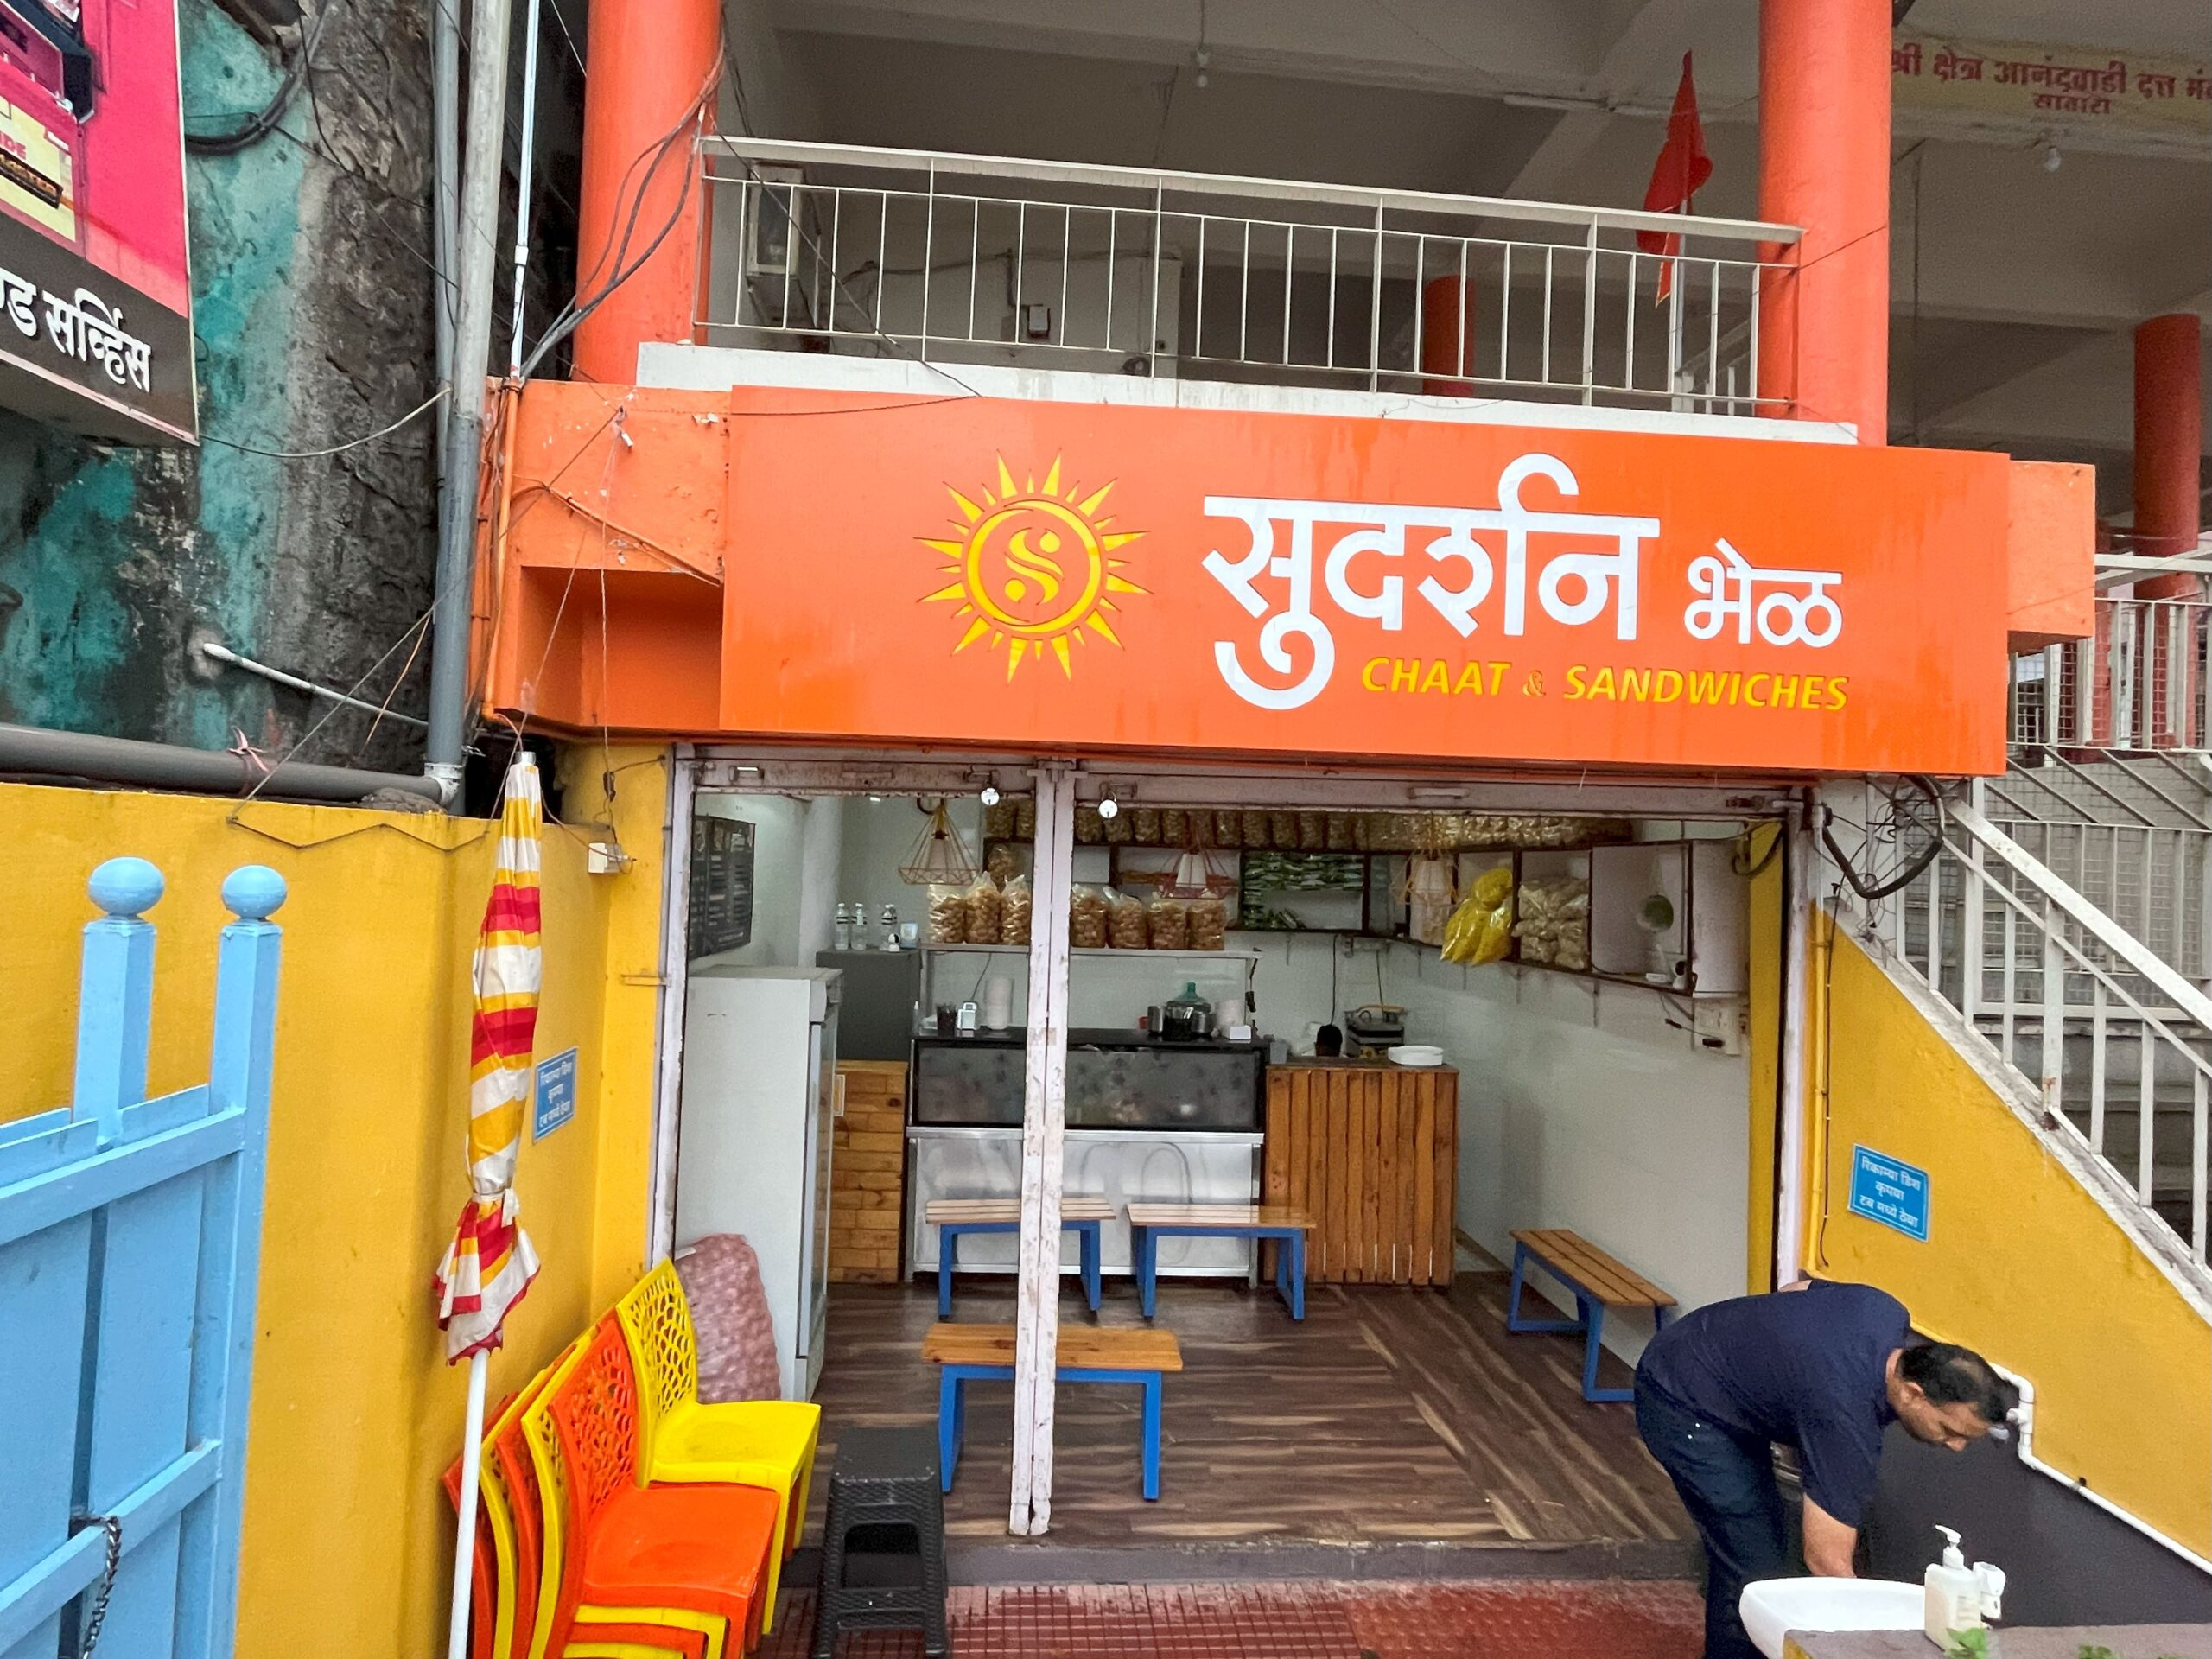 Sudarshan Bhel - a small joint in Satara serving some delicious Chaat dishes like Bhel and Sev Puri